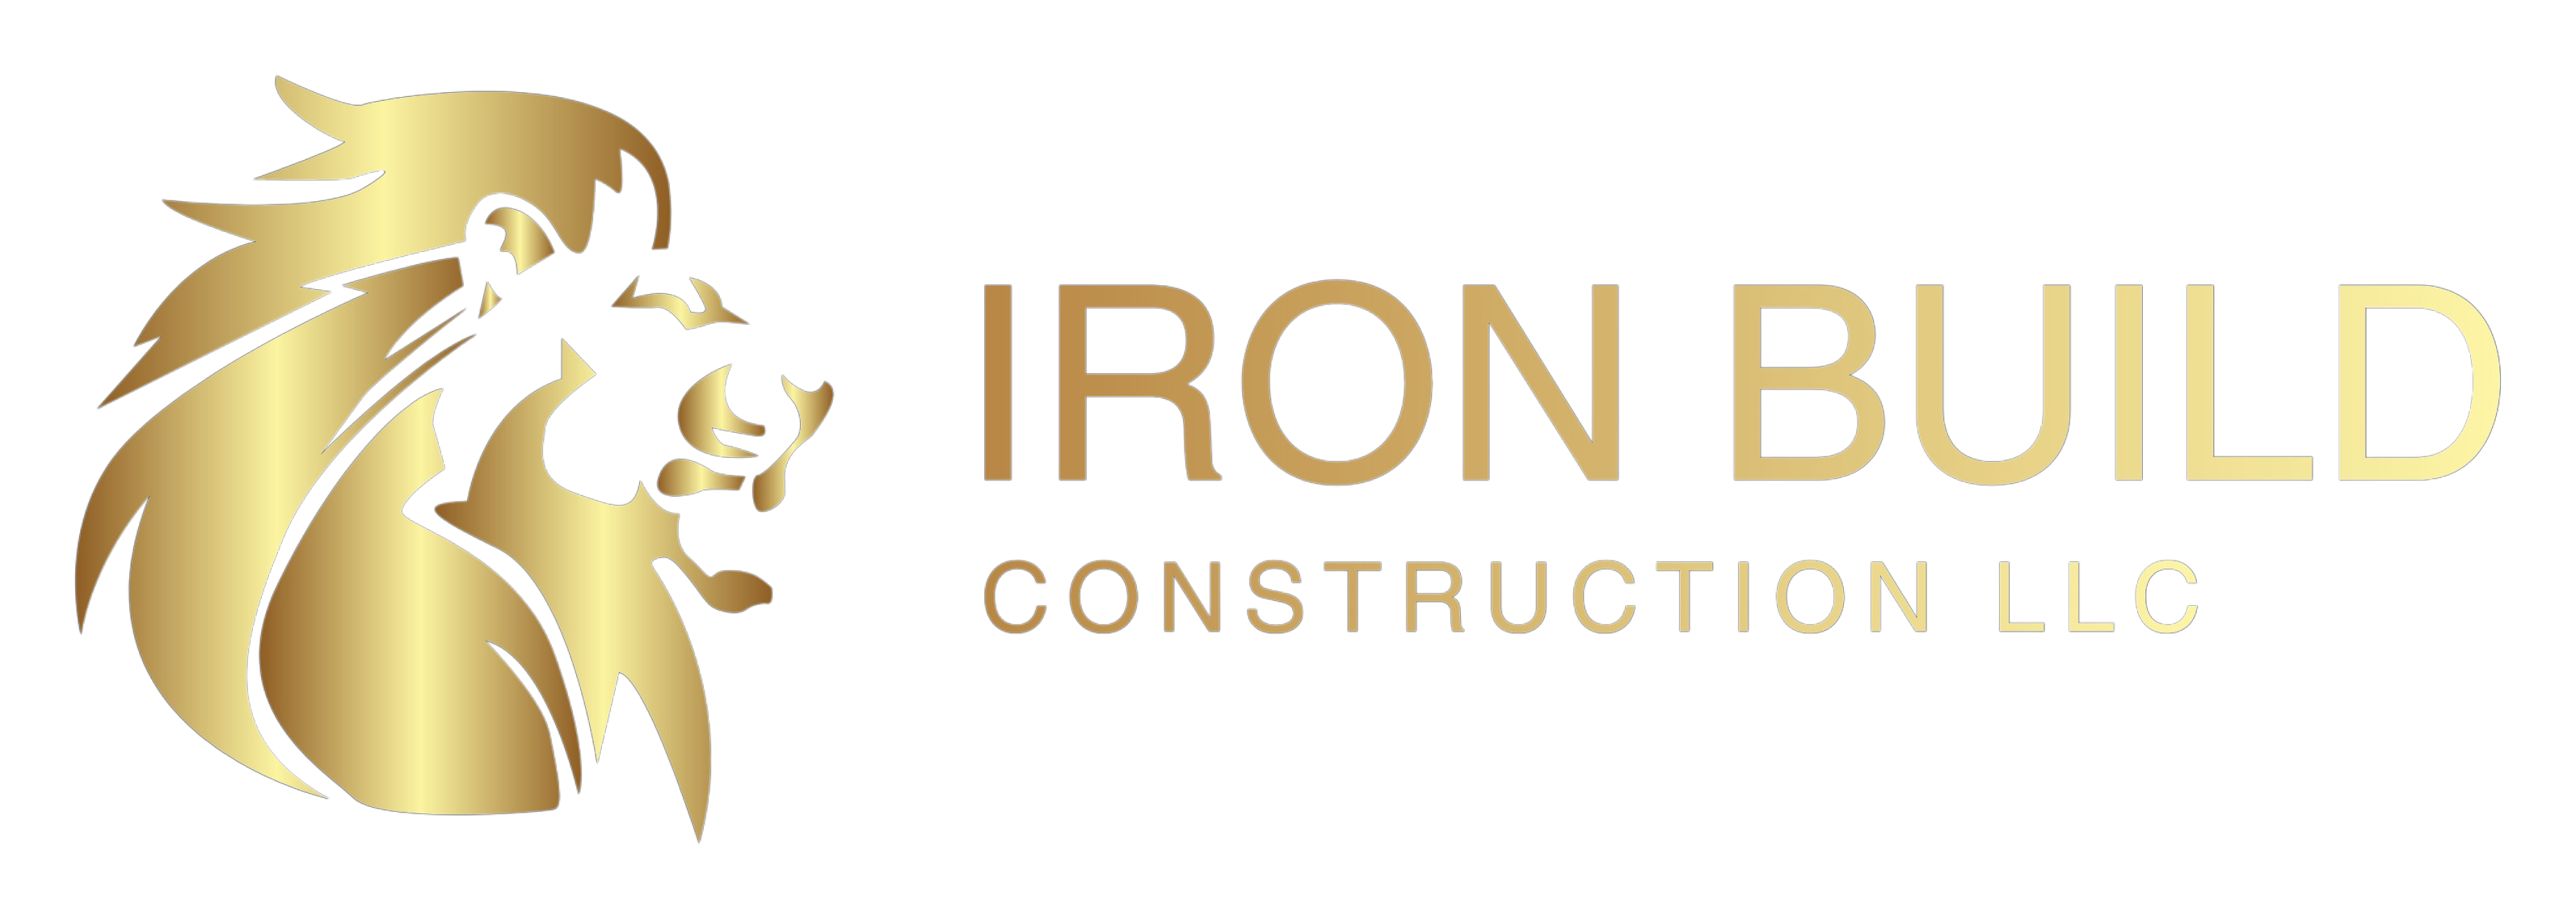 About | Remodeling & Design | Iron Build Construction LLC